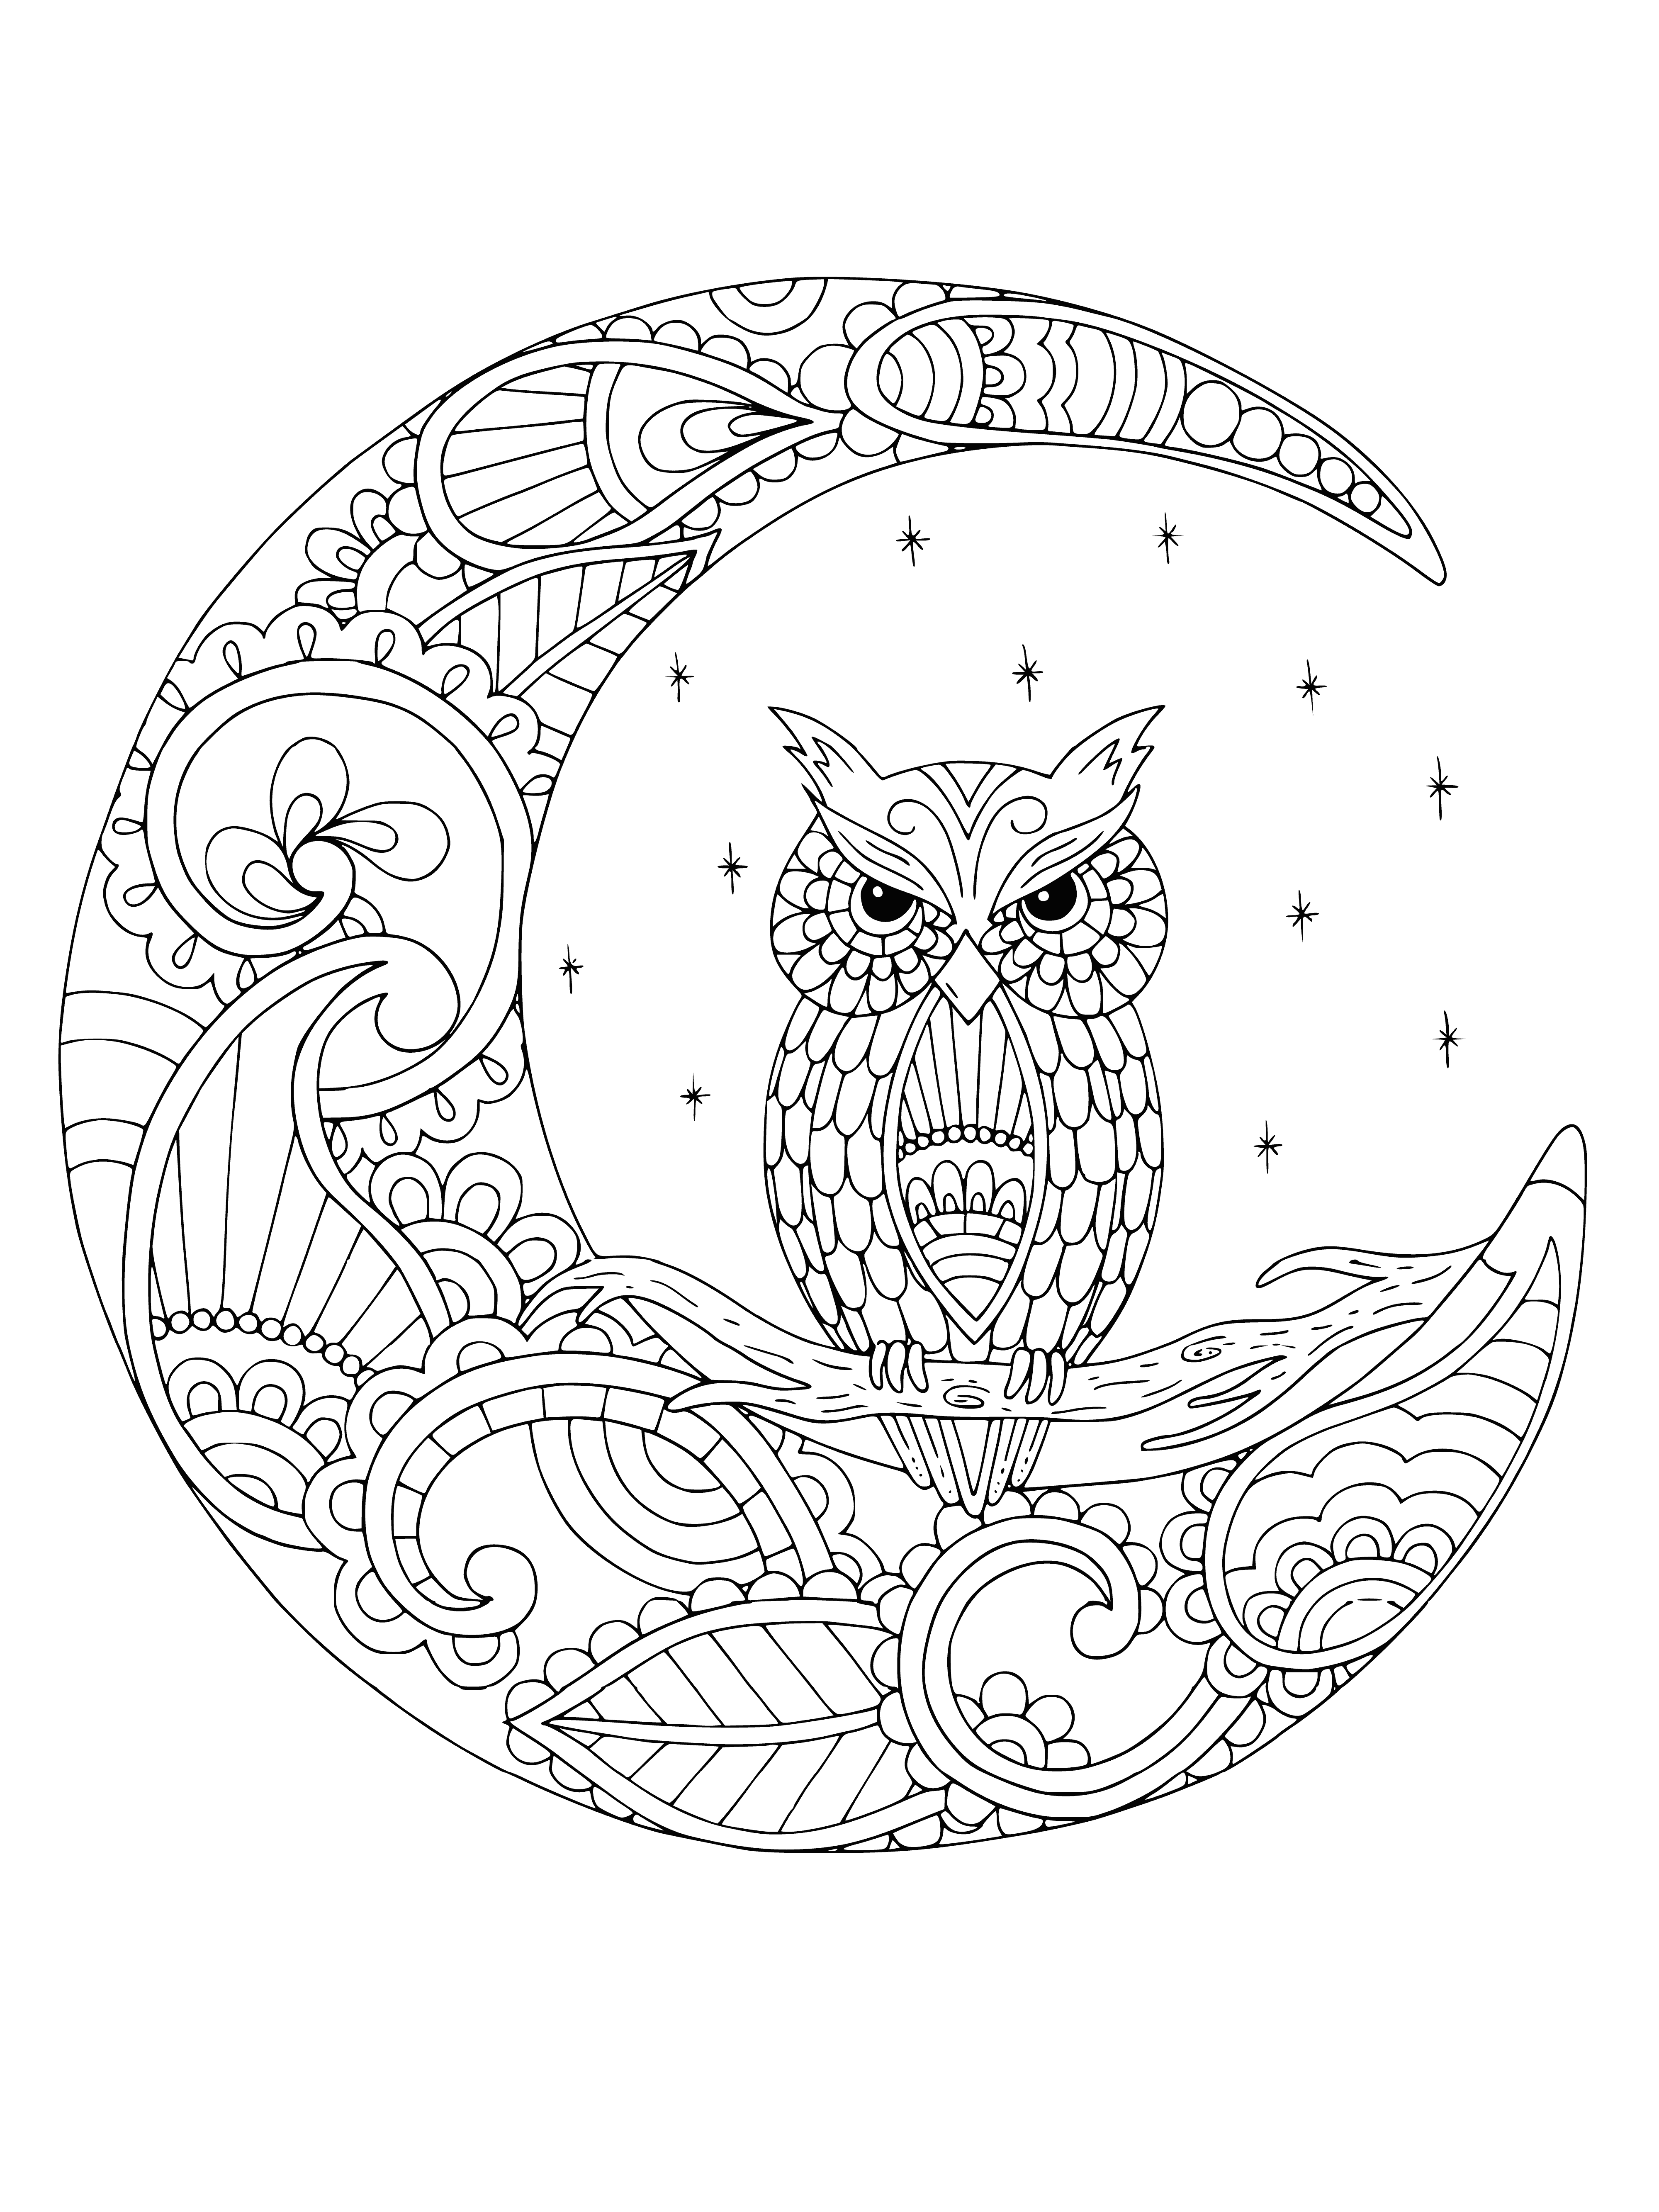 coloring page: Two owls sit on a branch, one looking at the moon, the other at the viewer.